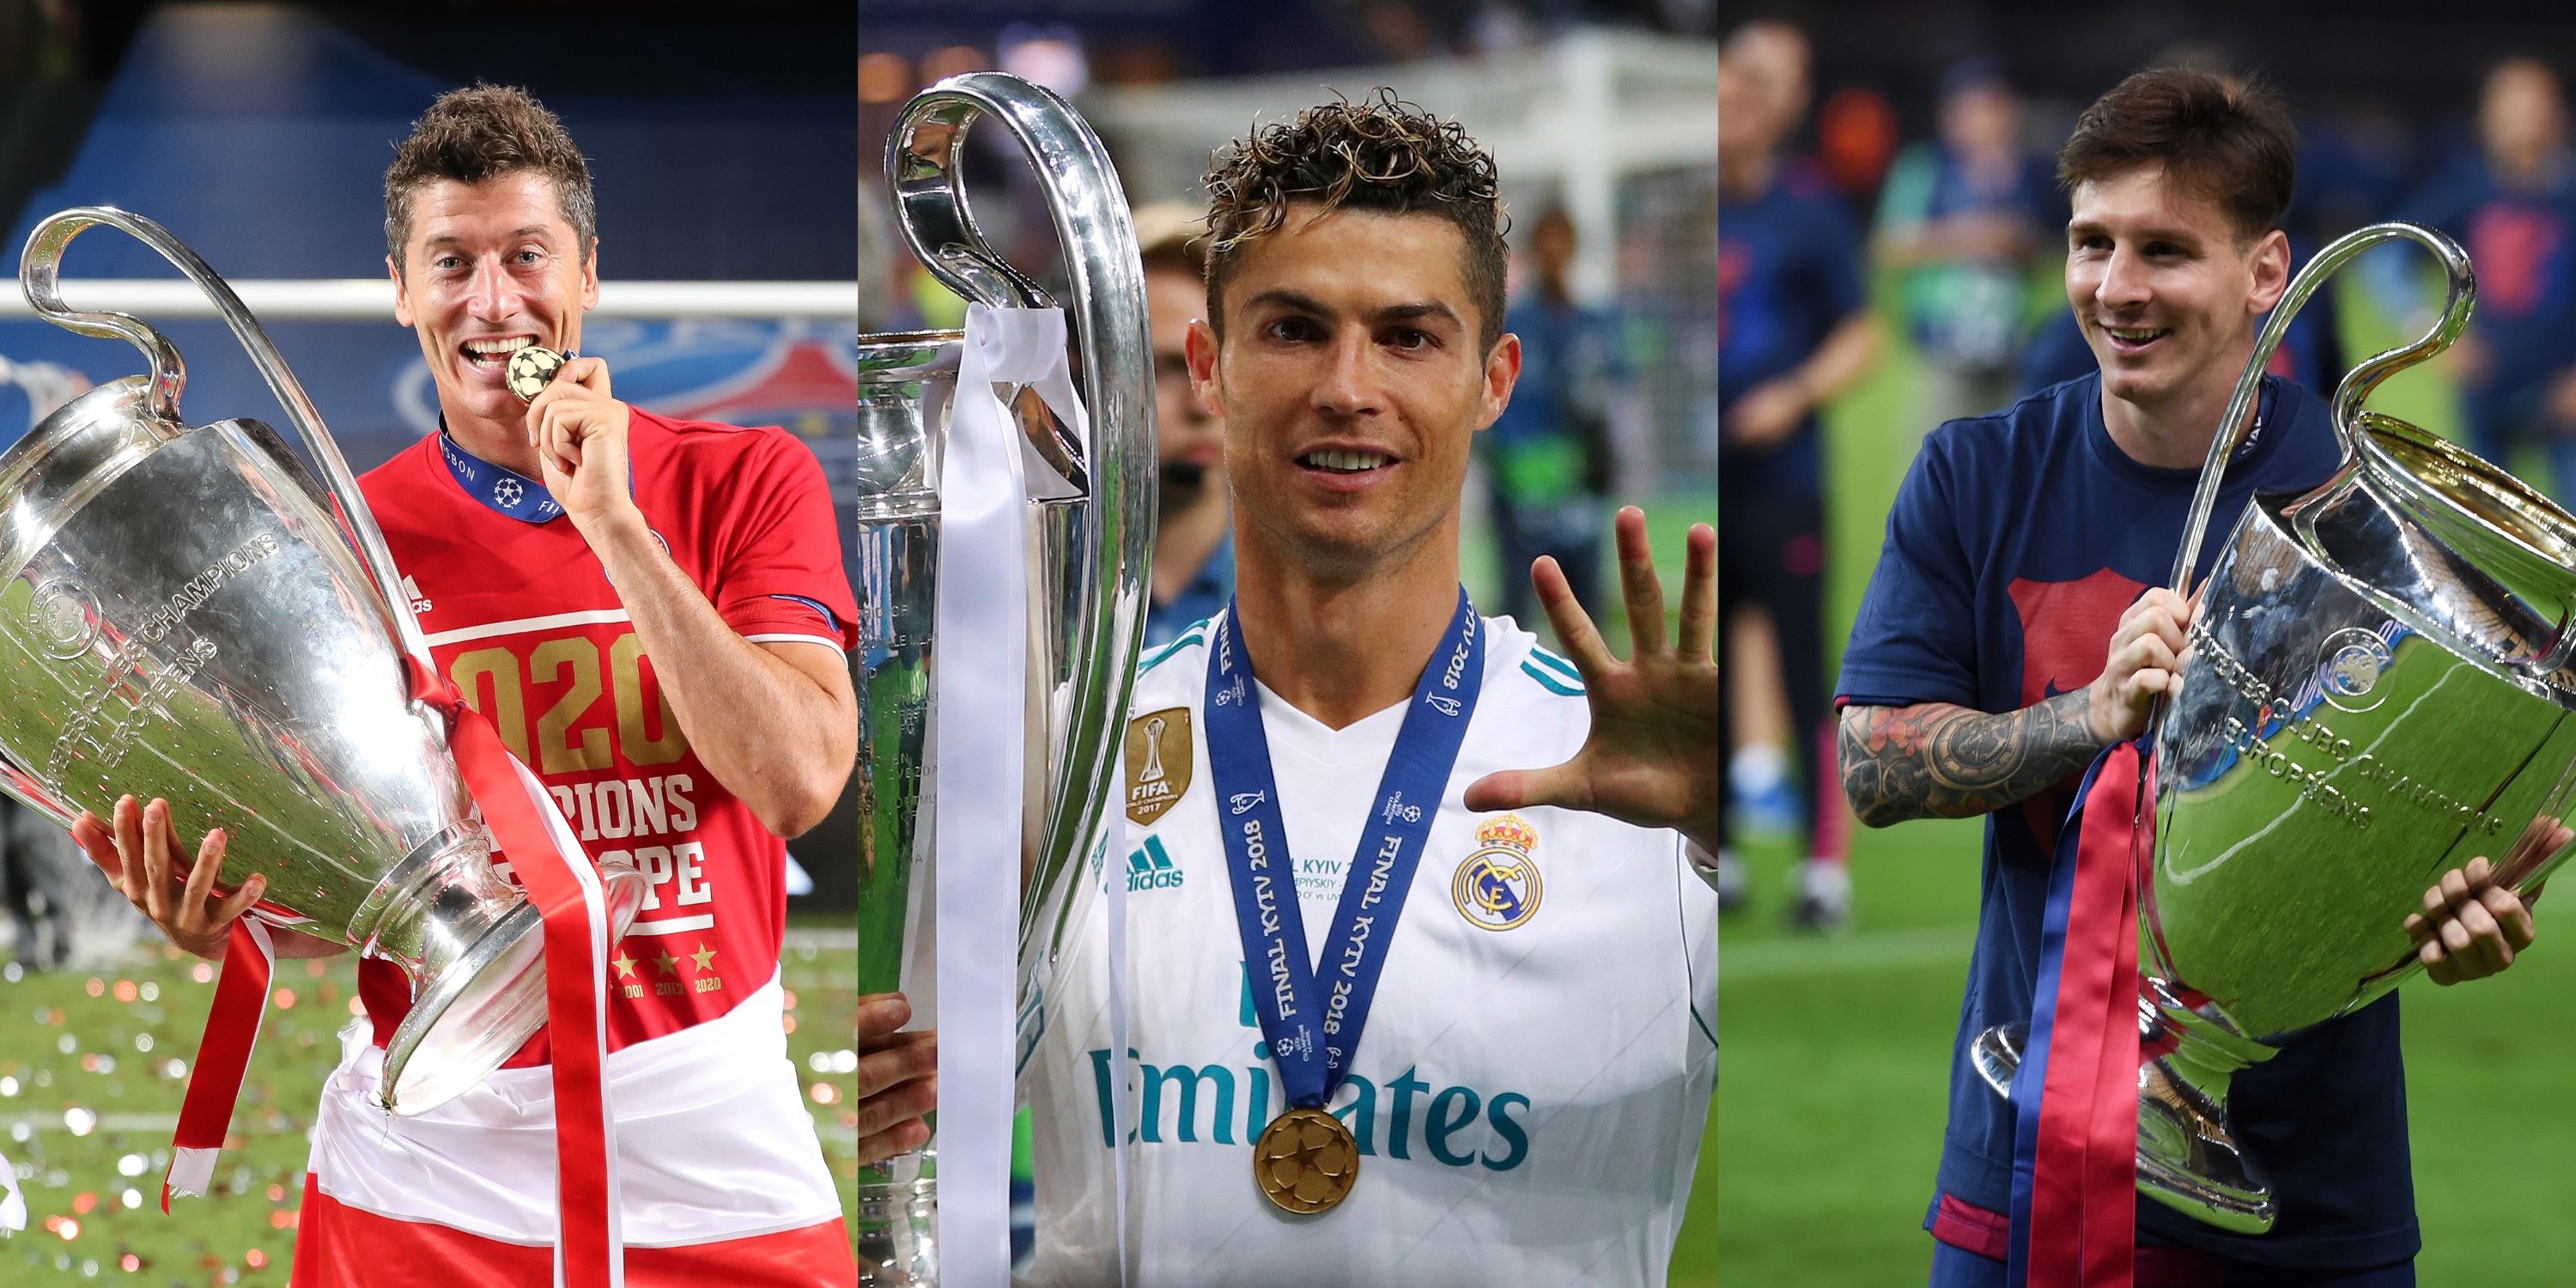 Robert Lewnadowski, Cristiano Ronaldo and Lionel Messi each holding the Champions League trophy